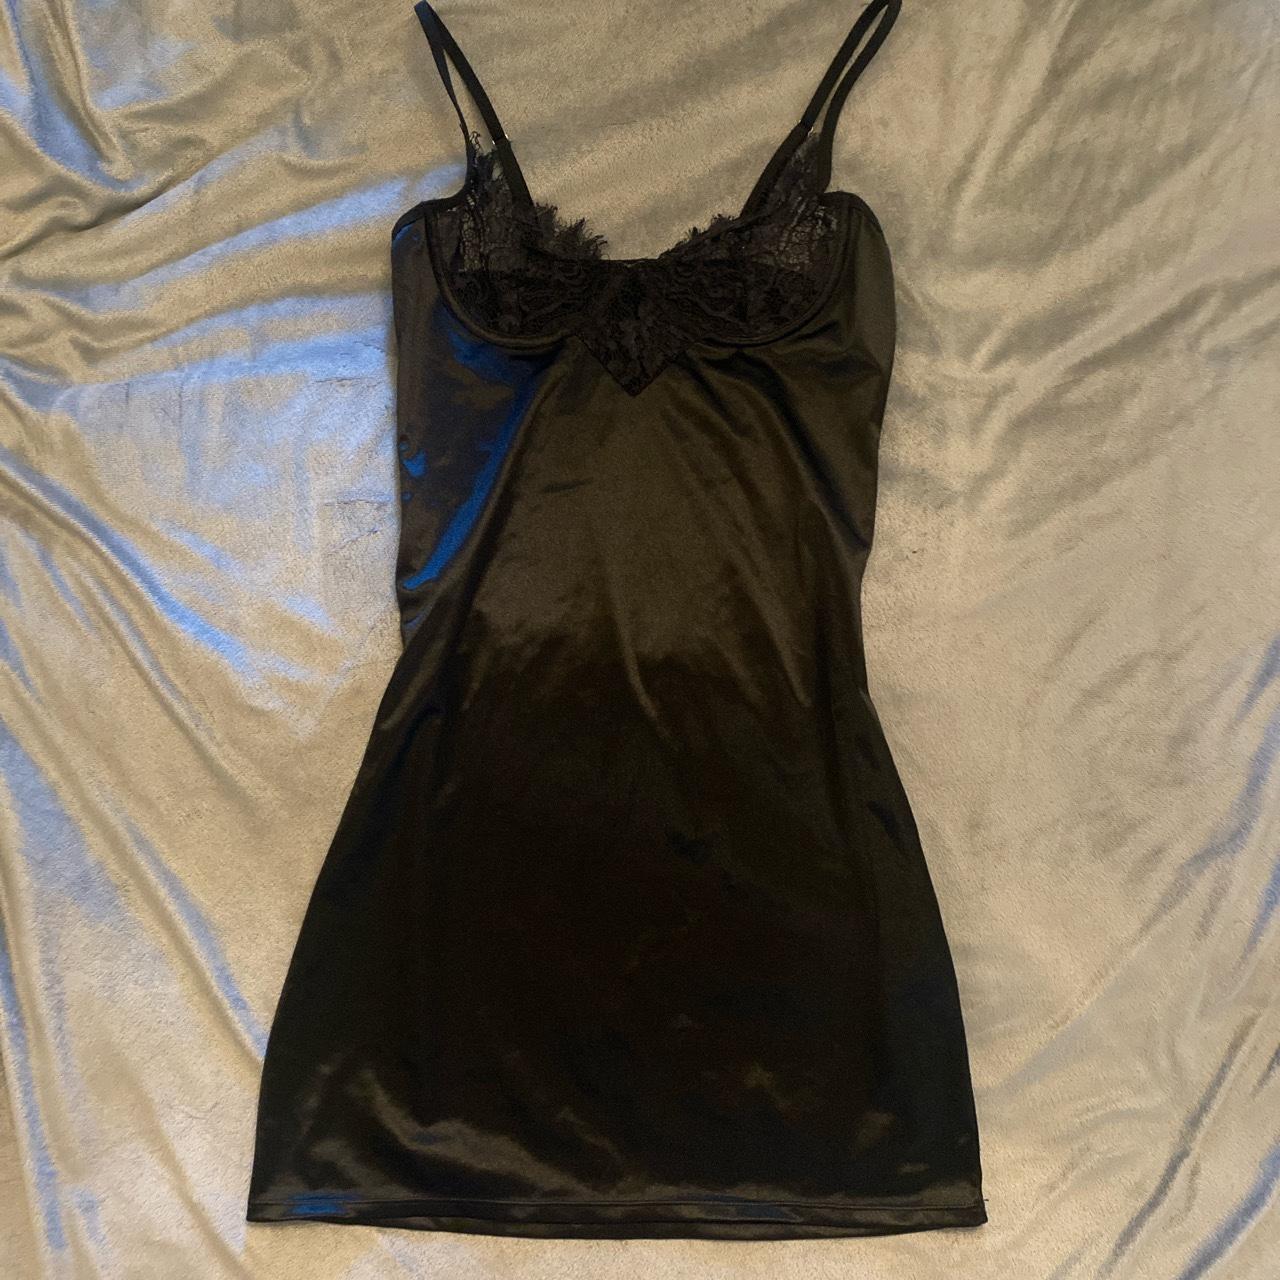 ୨୧ Mini Silk dress ೀ⋆｡ open to any messages about... - Depop